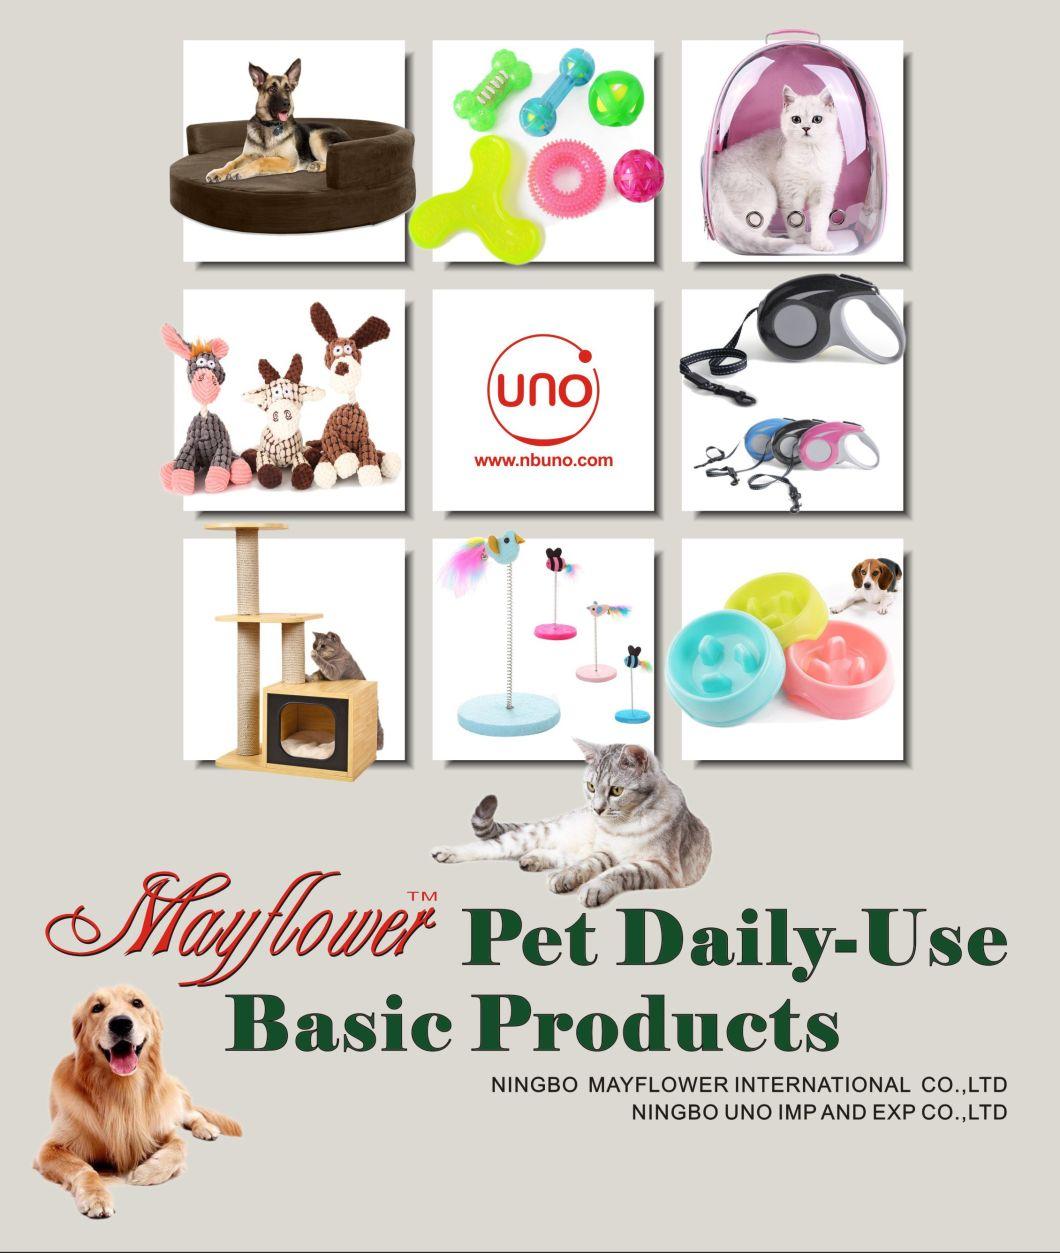 Pet Waste Clean-up Bags and Holders, Doggy Bag, Dog Bag, Cat Bag